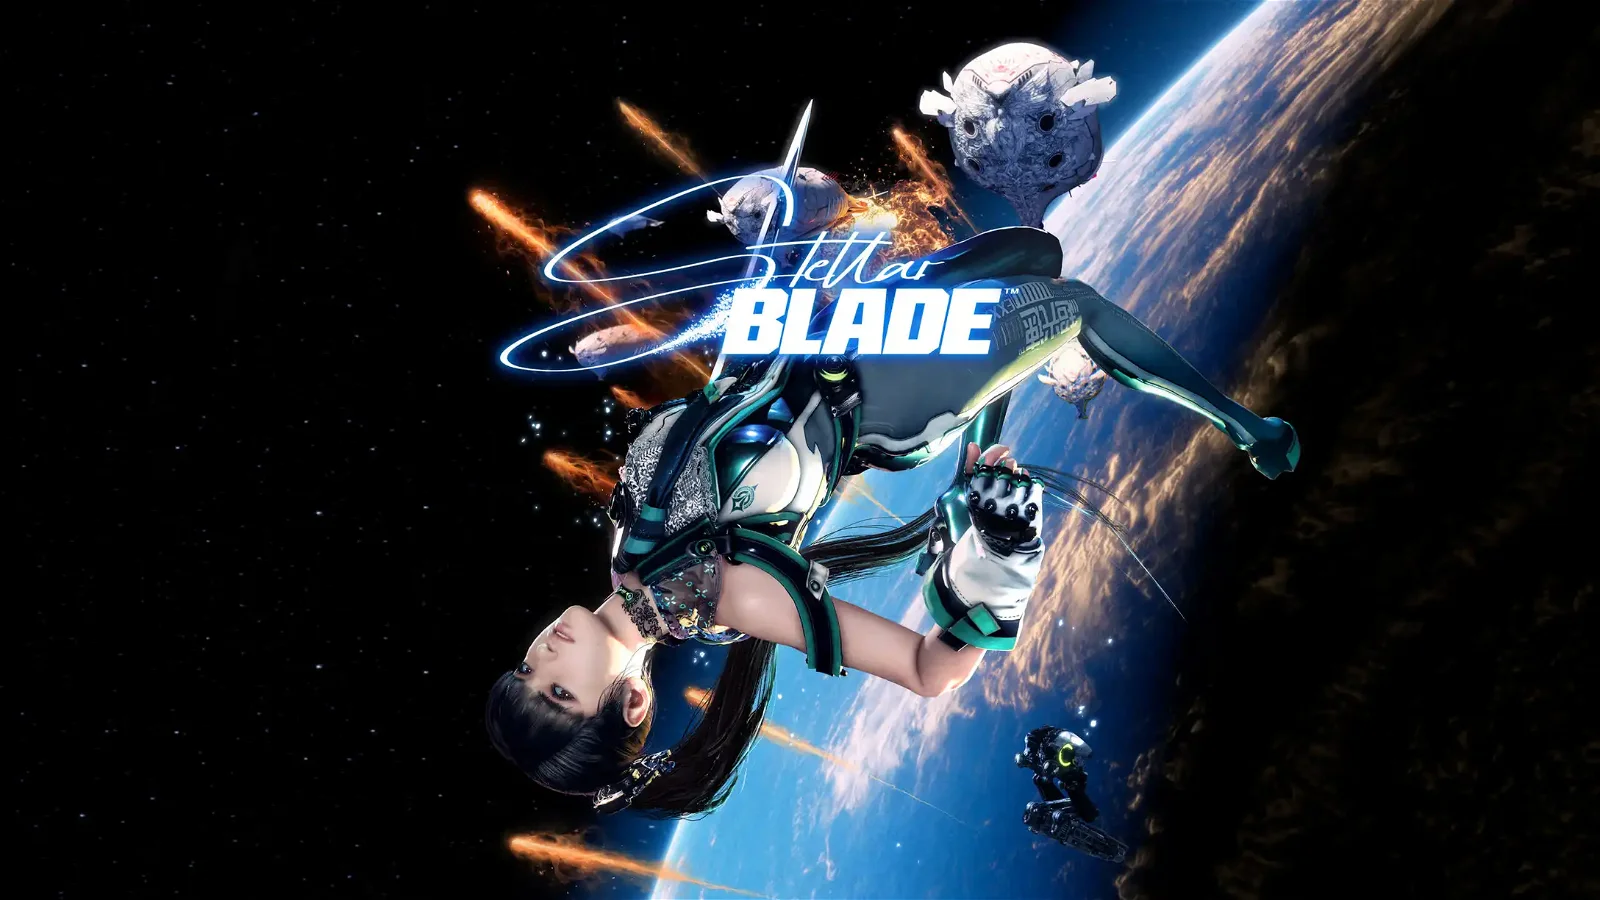 Is Stellar Blade in Italian? Here comes the answer